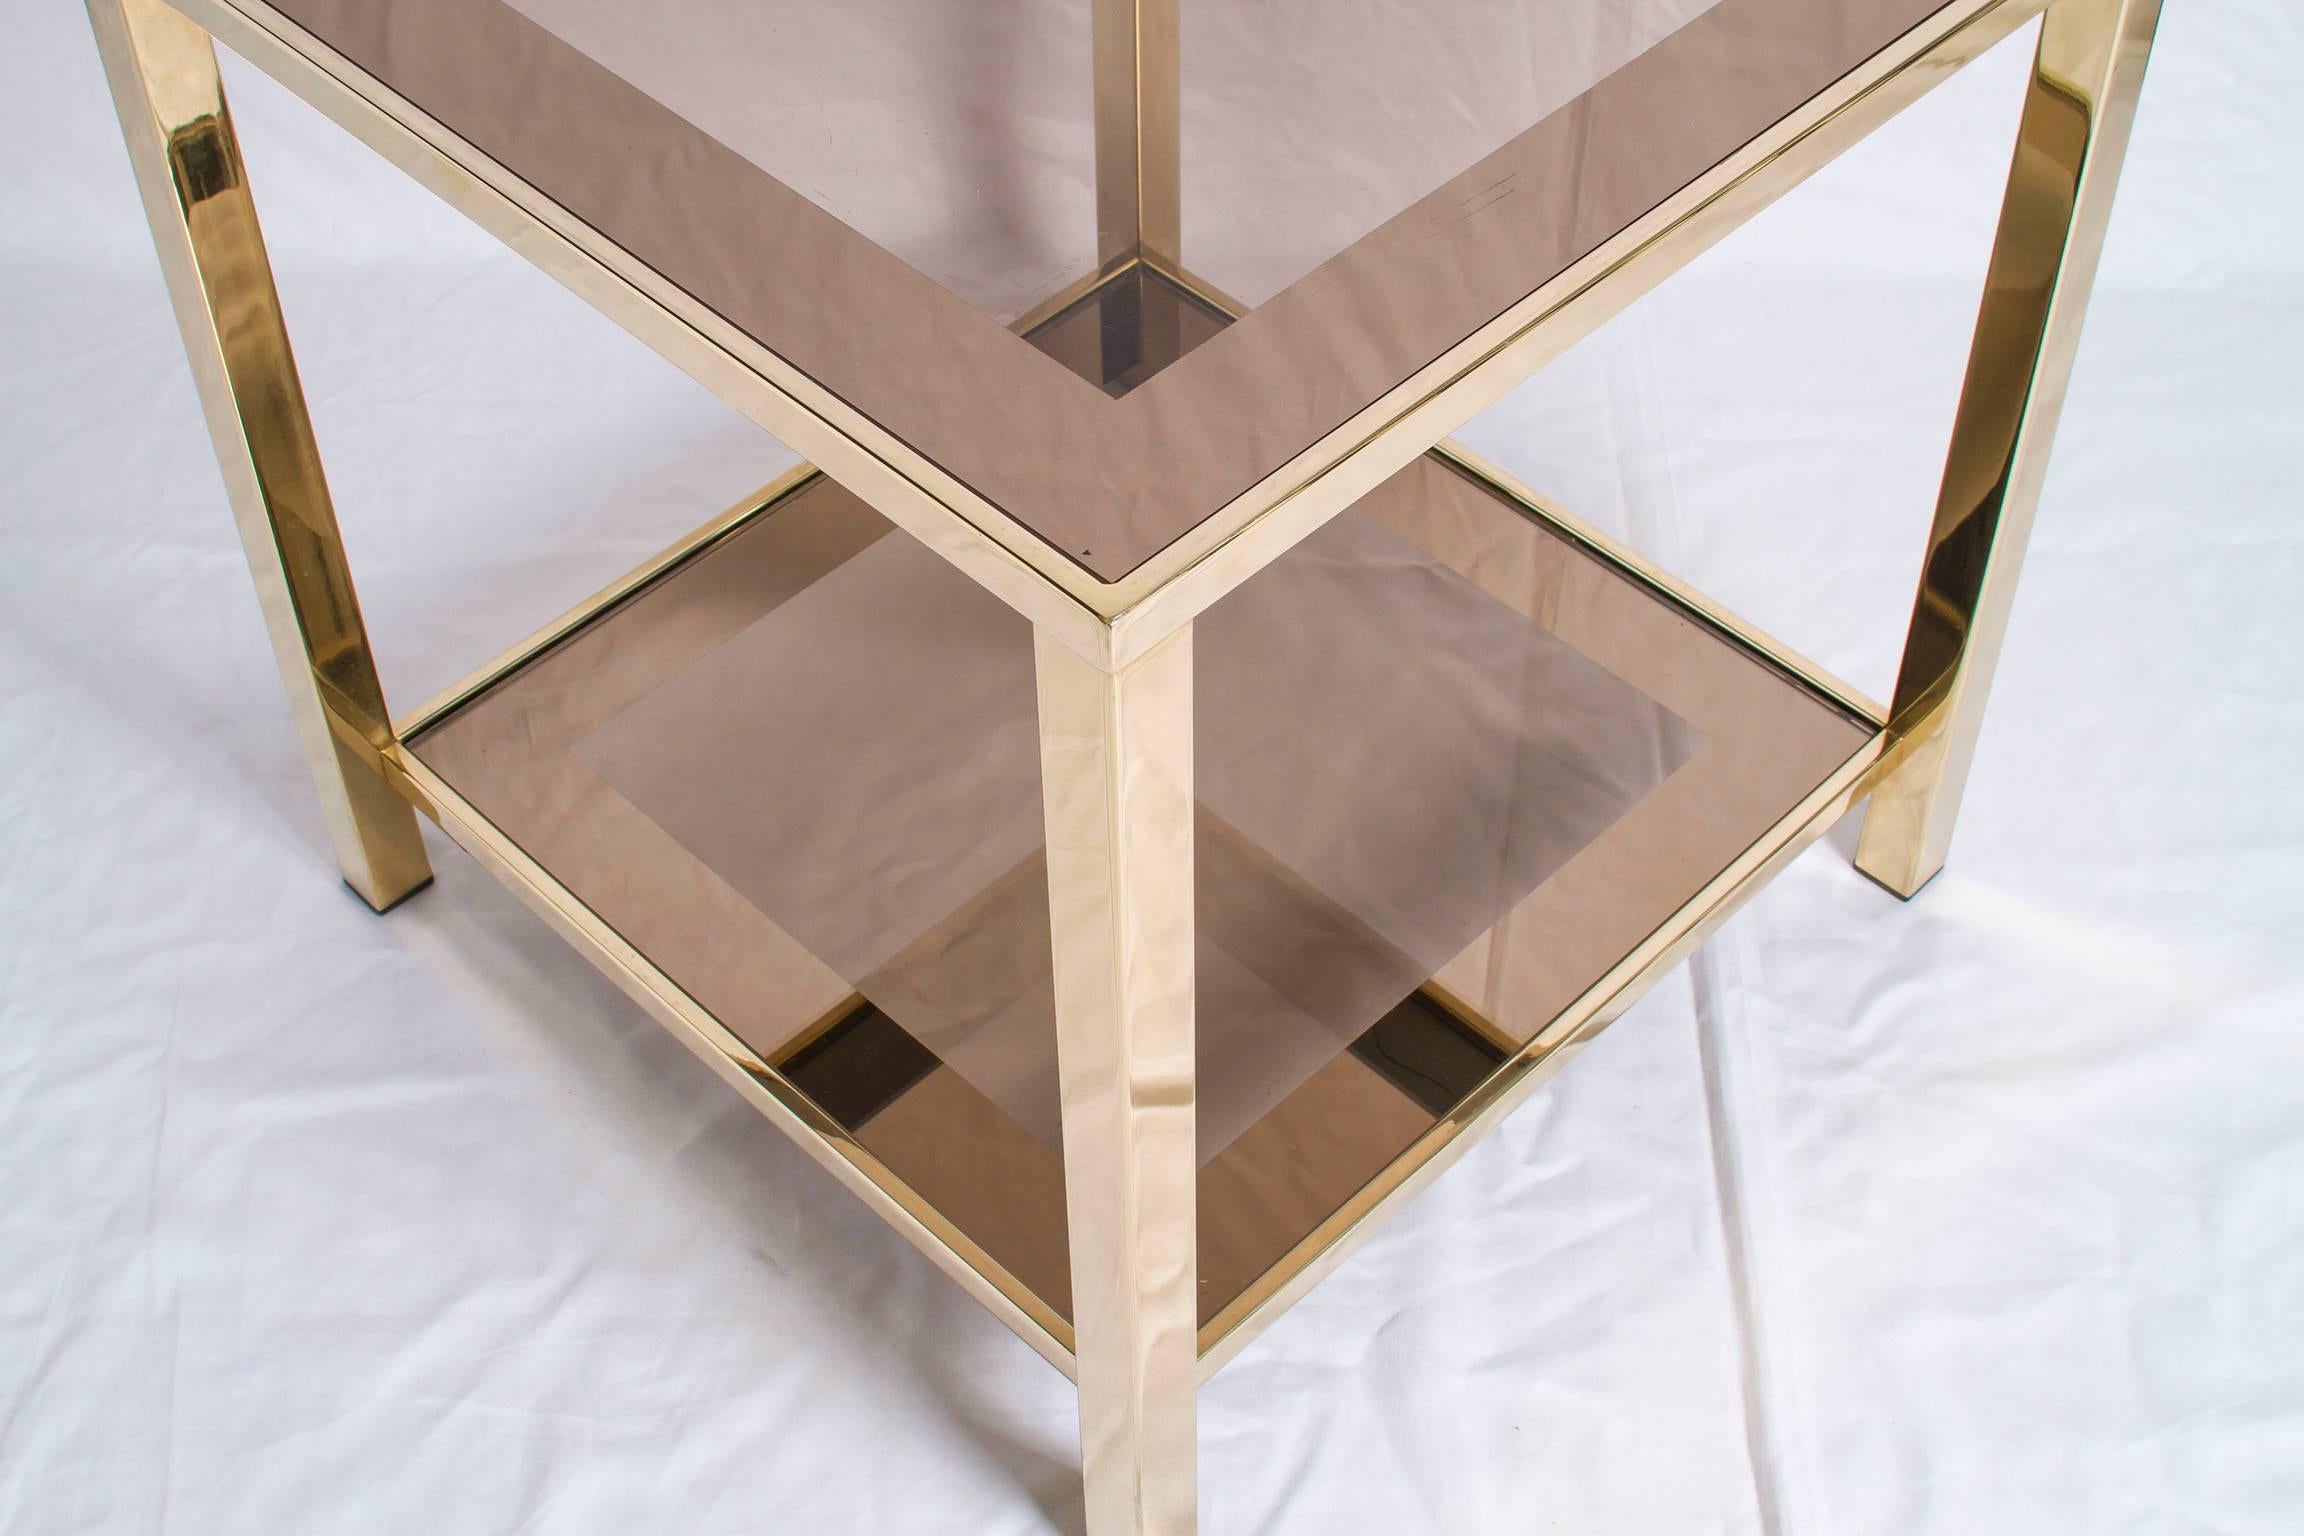 Belgian Pair of Two 23-Carat Gold-Plated Side Tables by Belgo Chrome